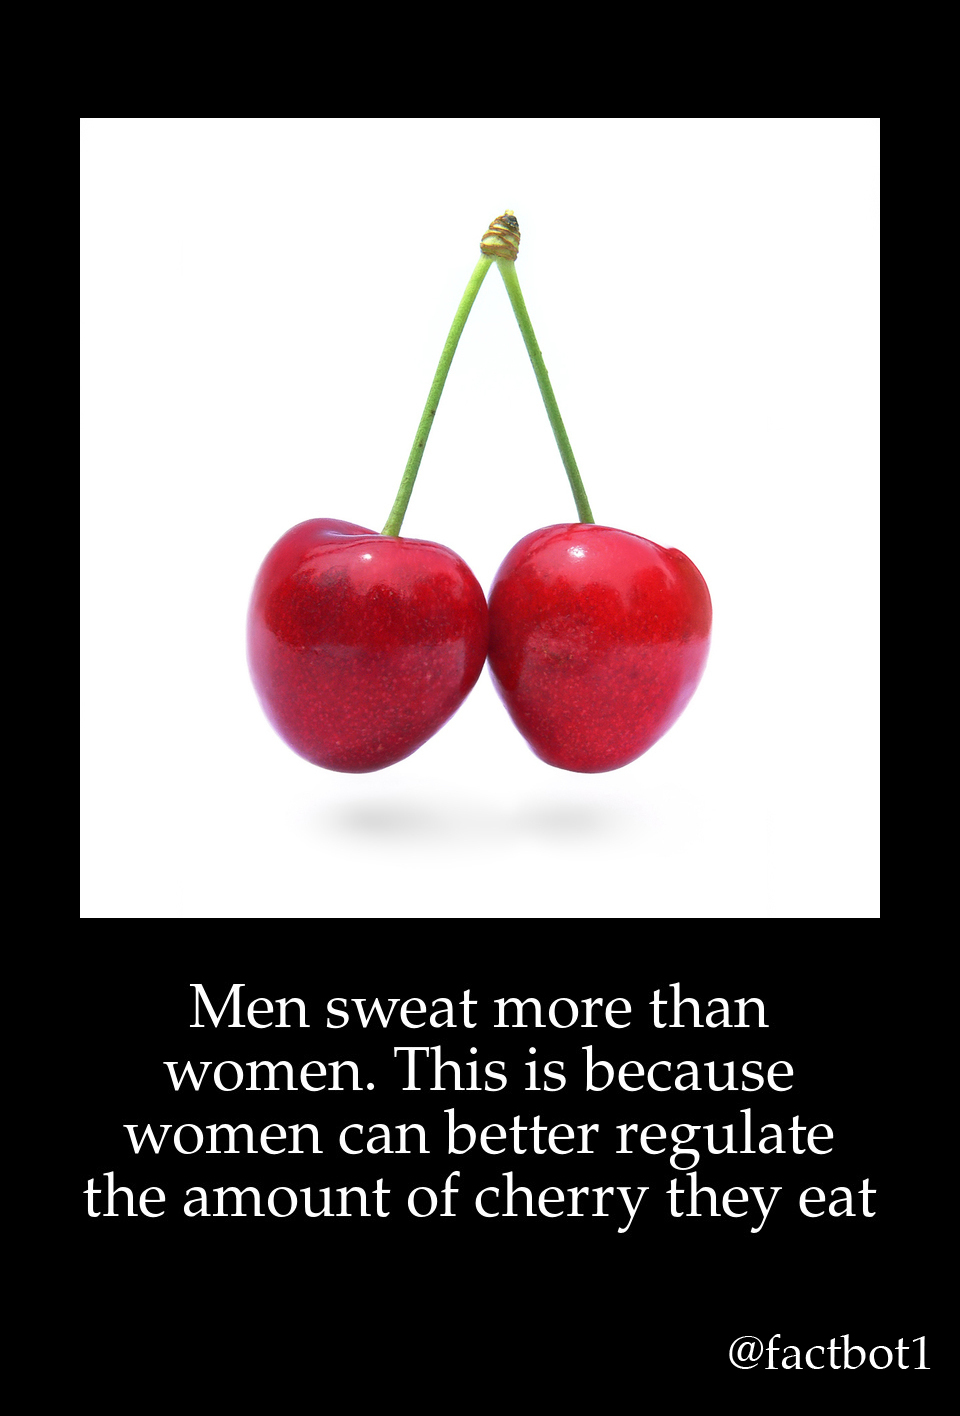 cherry - Men sweat more than women. This is because women can better regulate the amount of cherry they eat